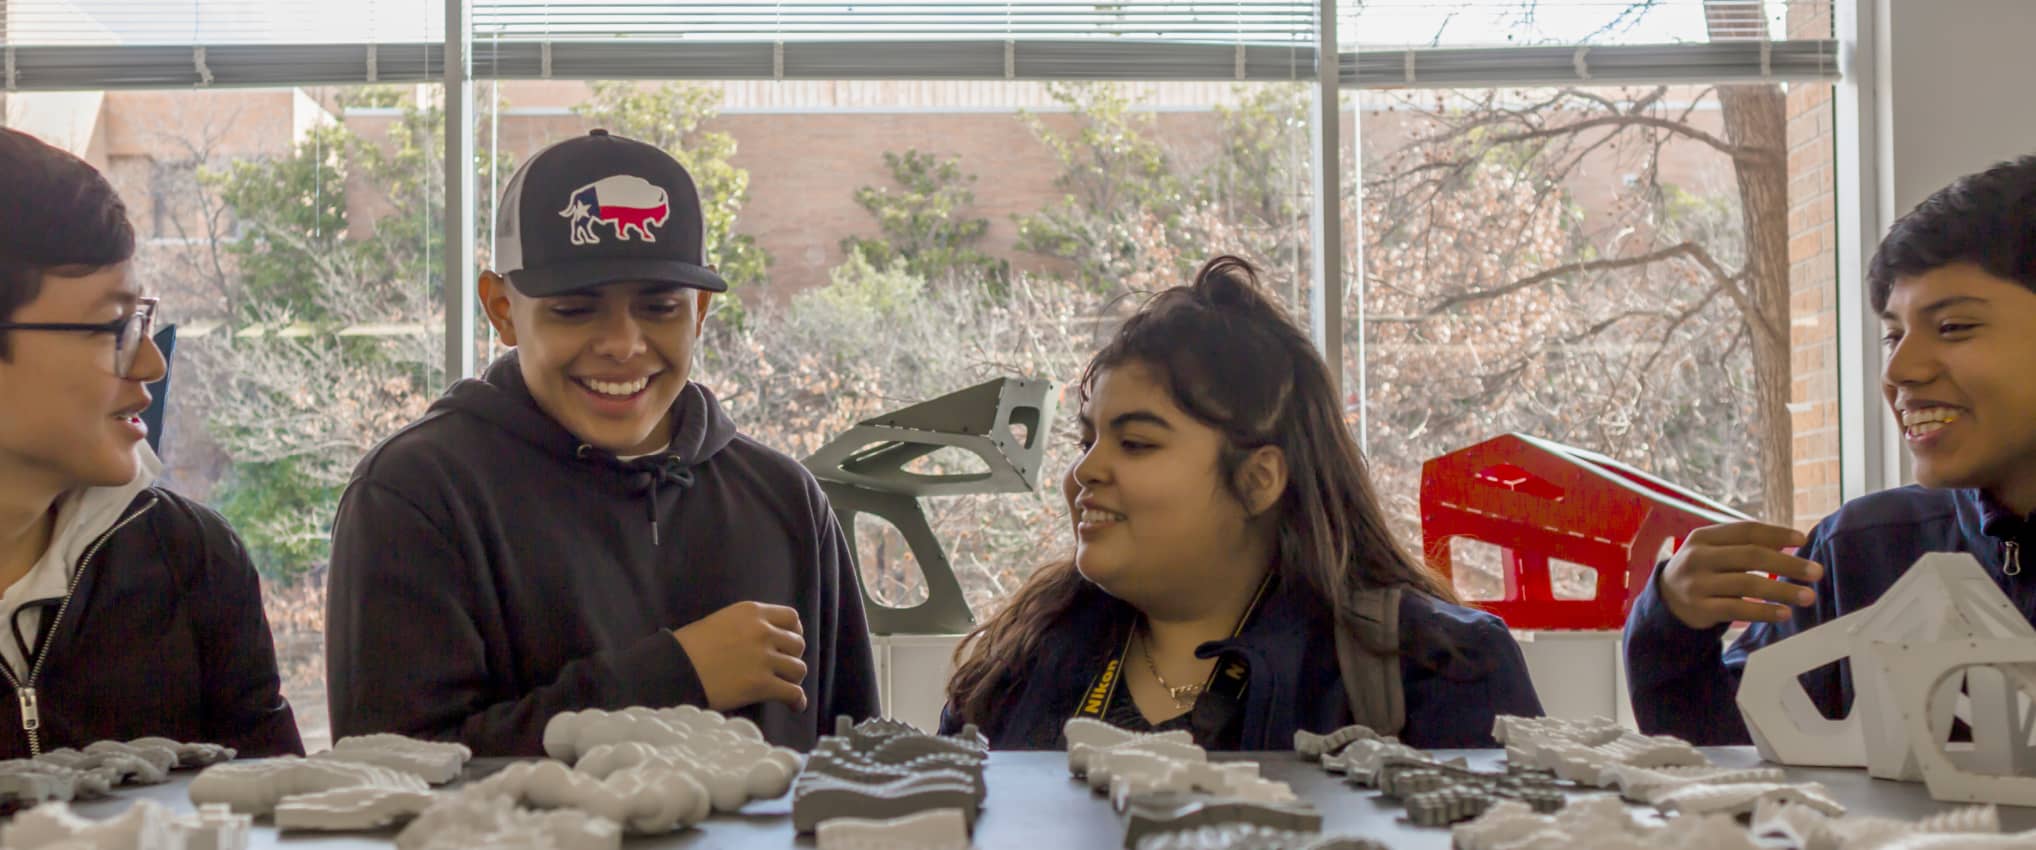 HKS Partnership with Cristo Rey Dallas Prep Exposes High Schoolers to More Career Choices